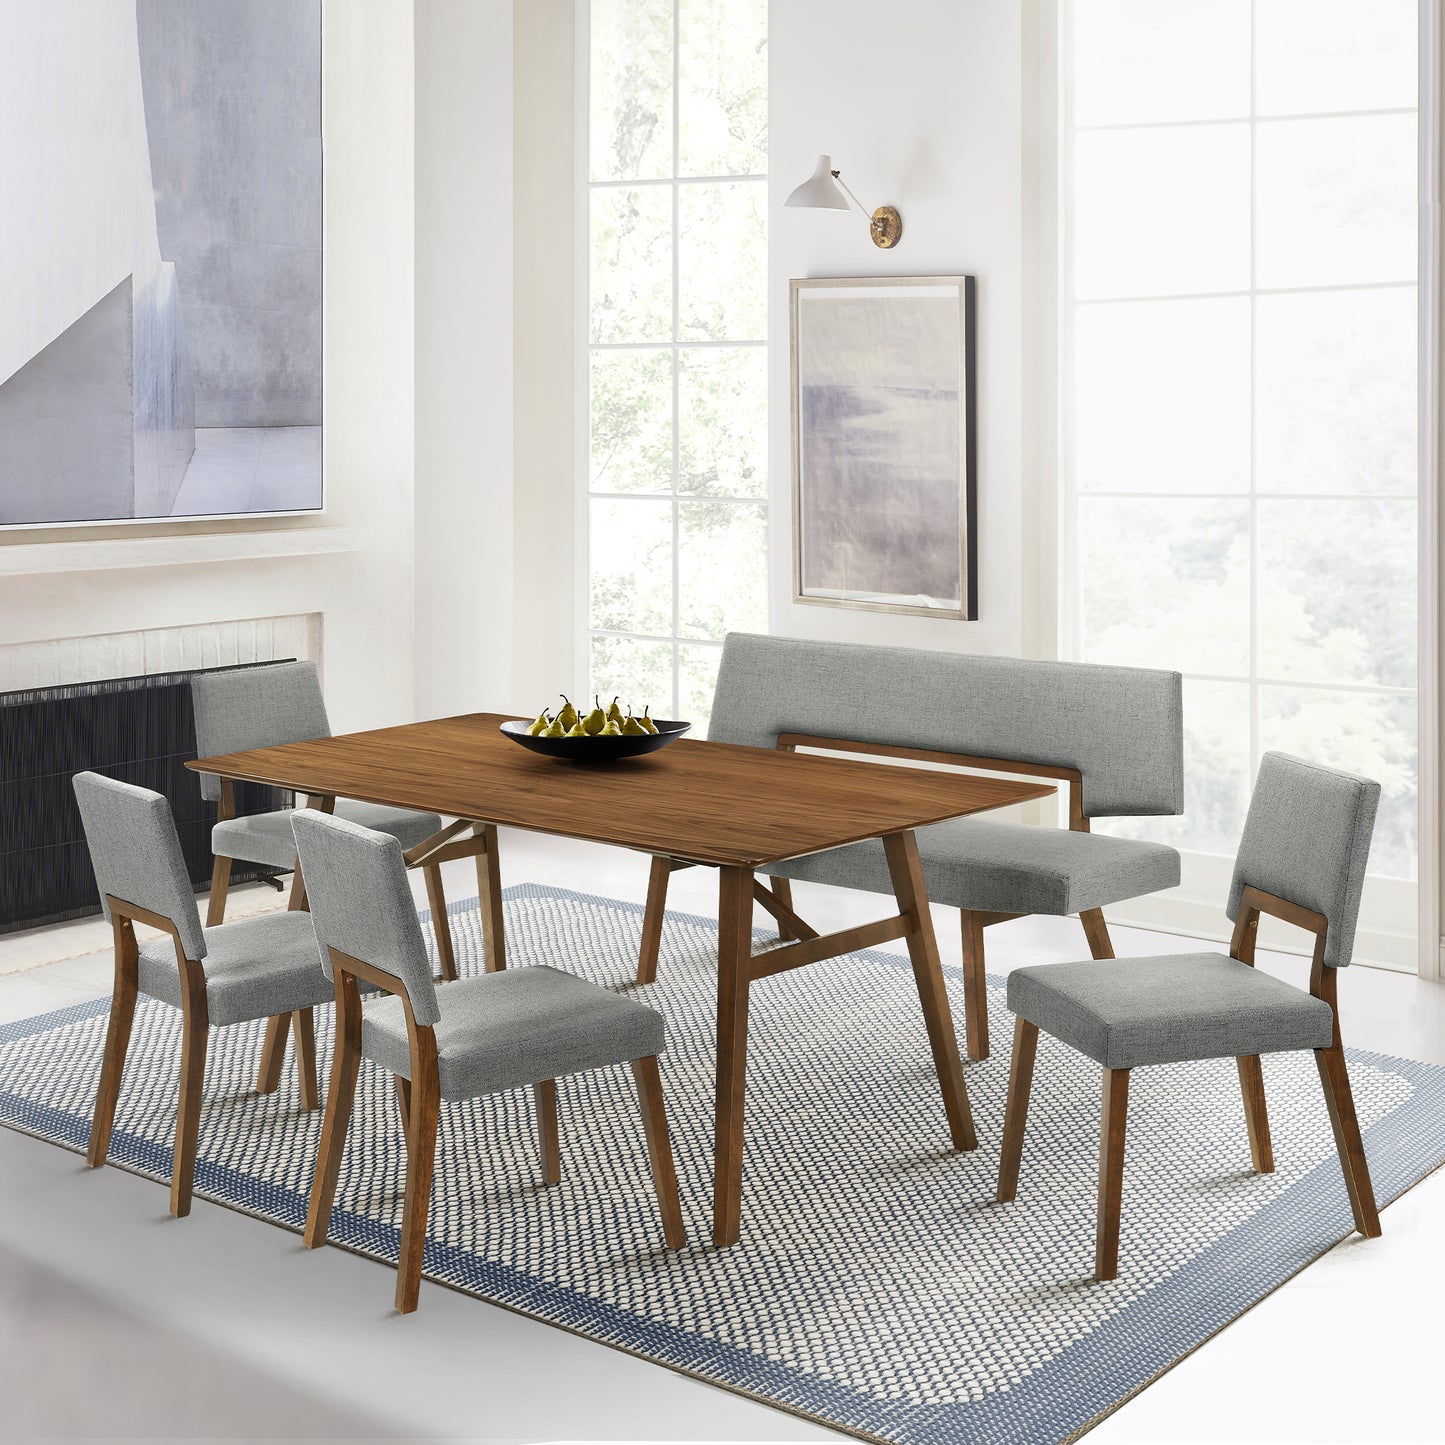 Channell 6 Piece Walnut Wood Dining Table Set with Bench in Charcoal Fabric